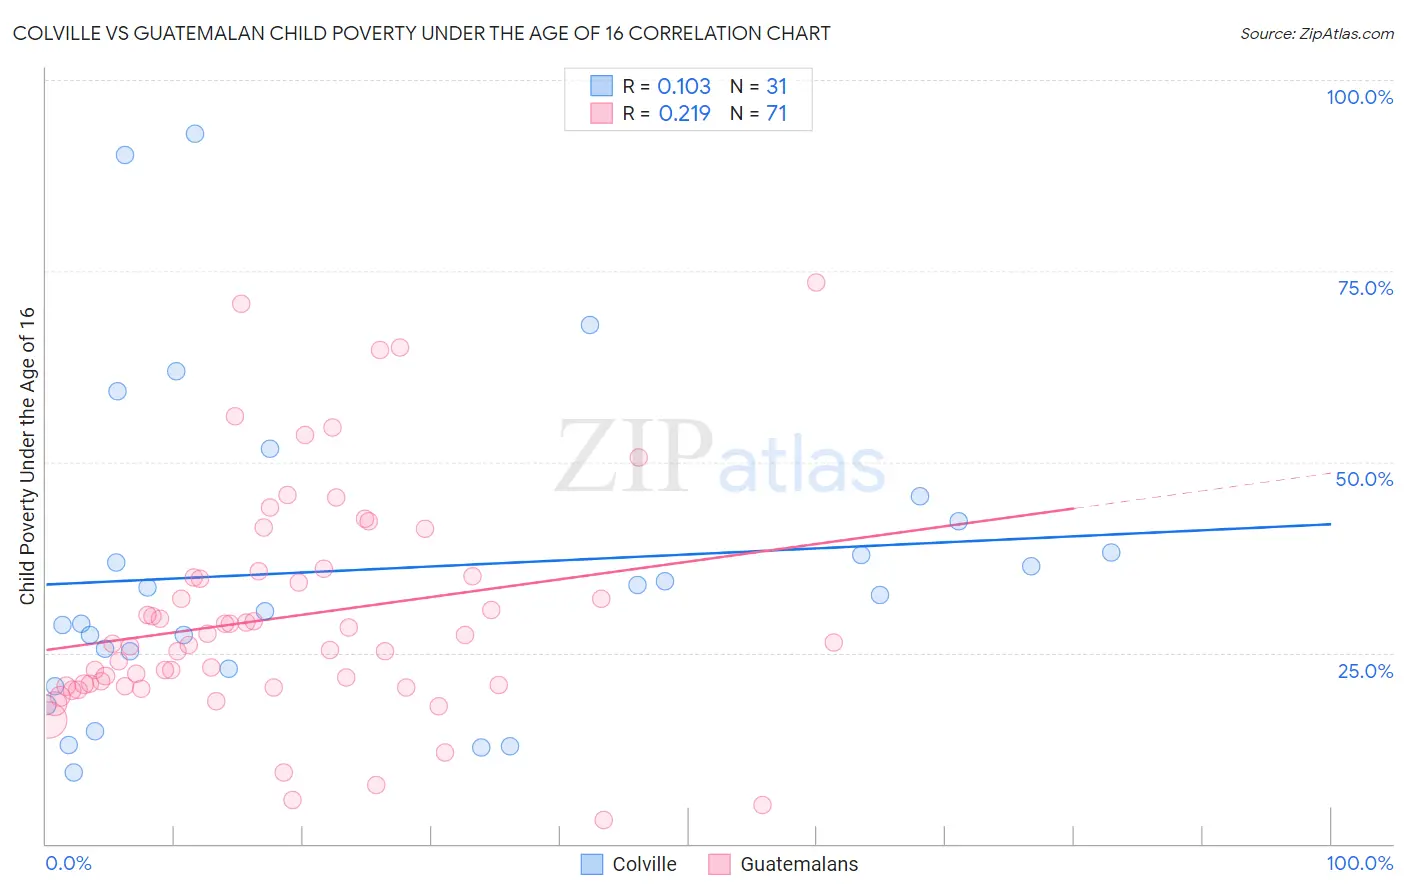 Colville vs Guatemalan Child Poverty Under the Age of 16